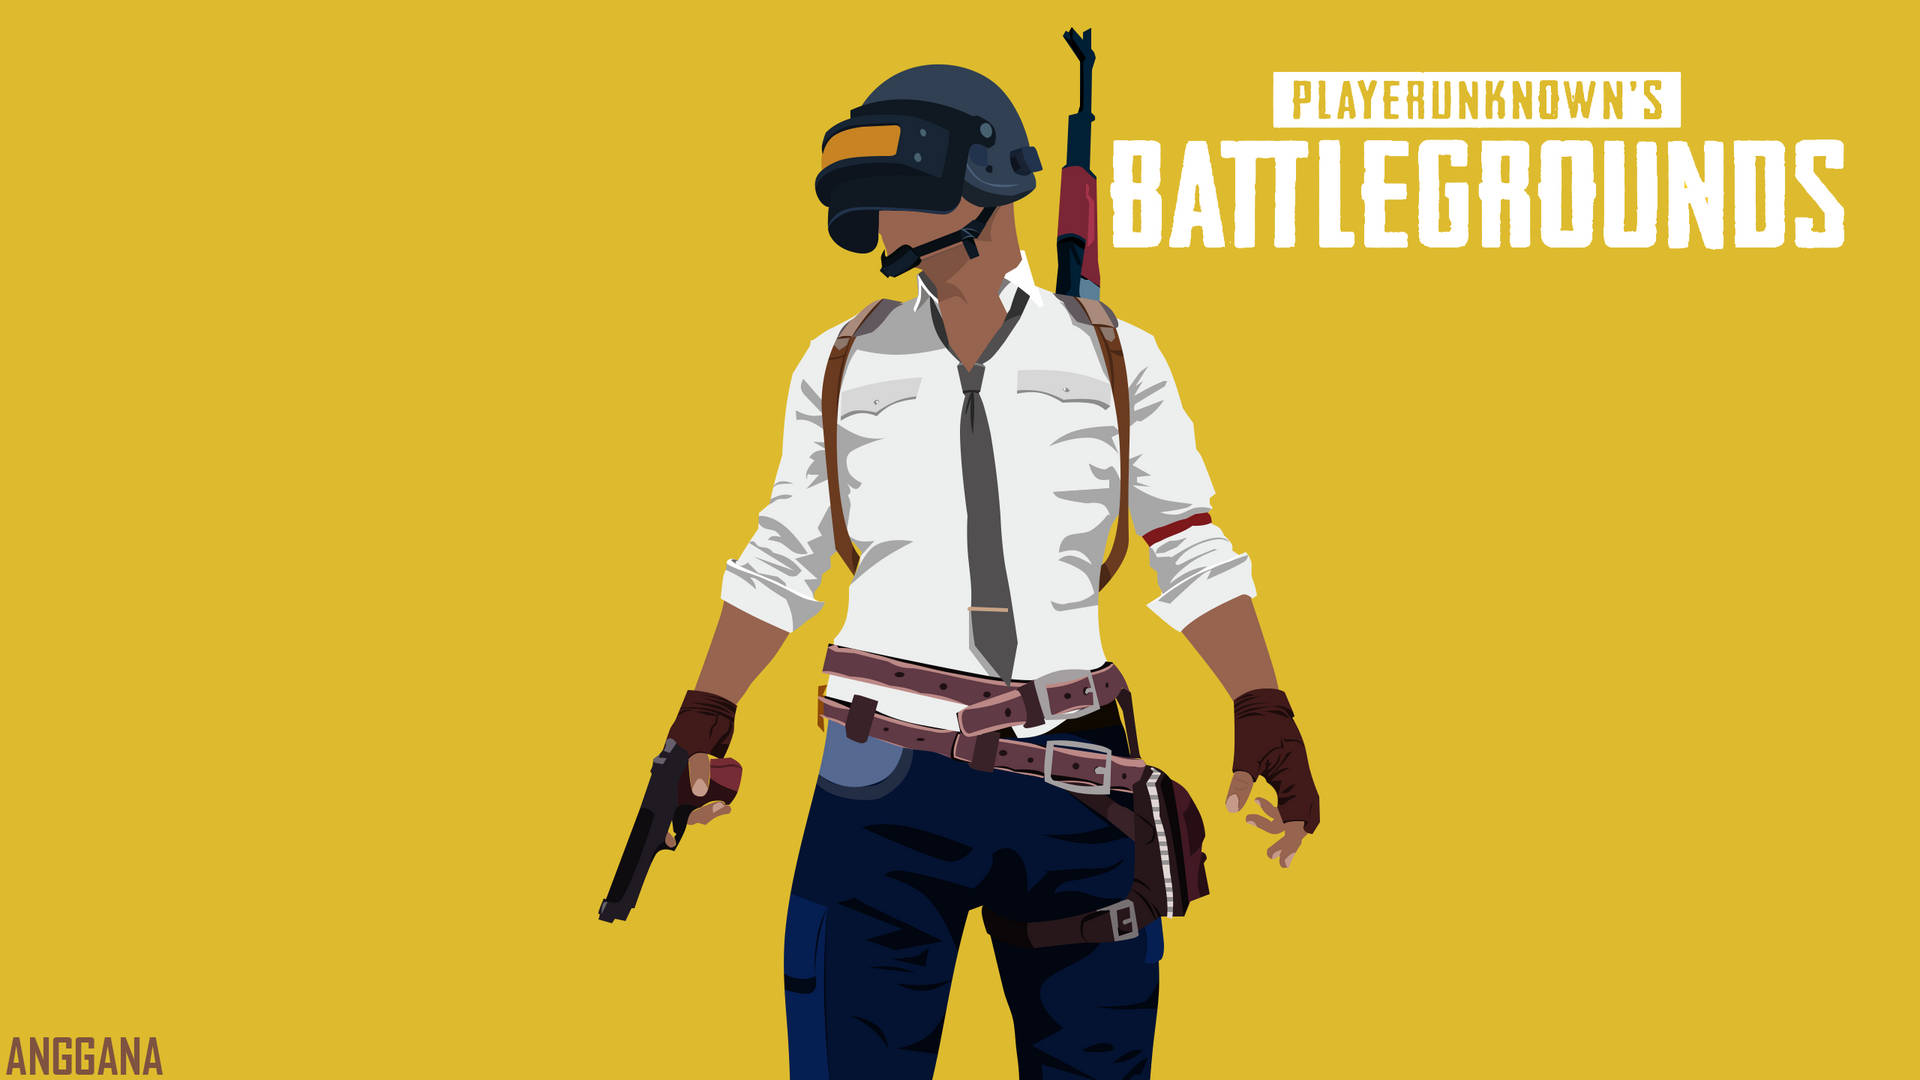 Free Playerunknown's Battlegrounds Wallpaper Downloads, [200+] Playerunknown's  Battlegrounds Wallpapers for FREE 